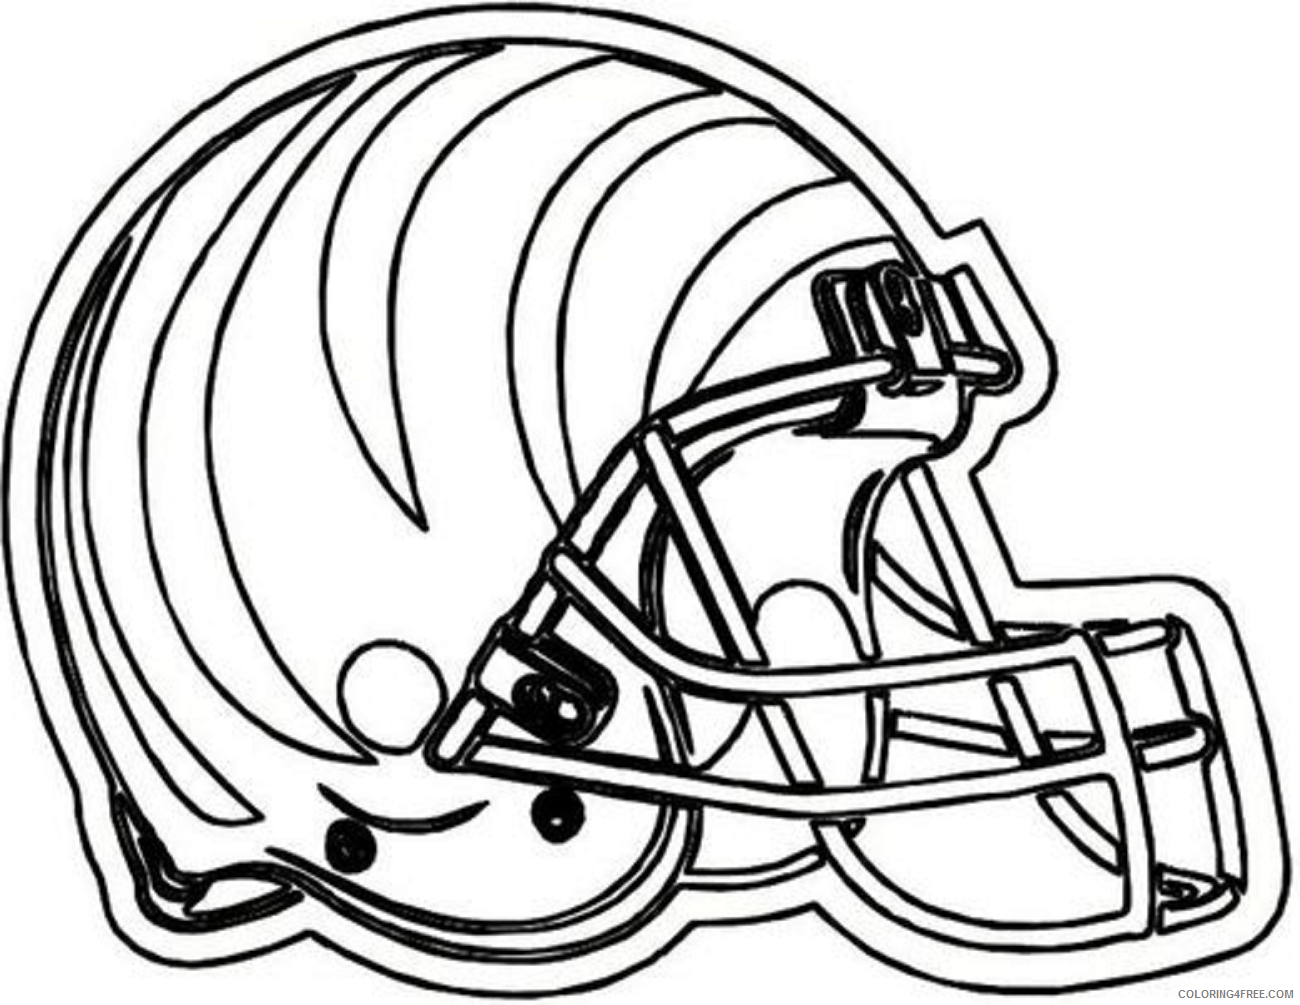 Football Helmet Coloring Pages for boys Printable 2020 0406 Coloring4free